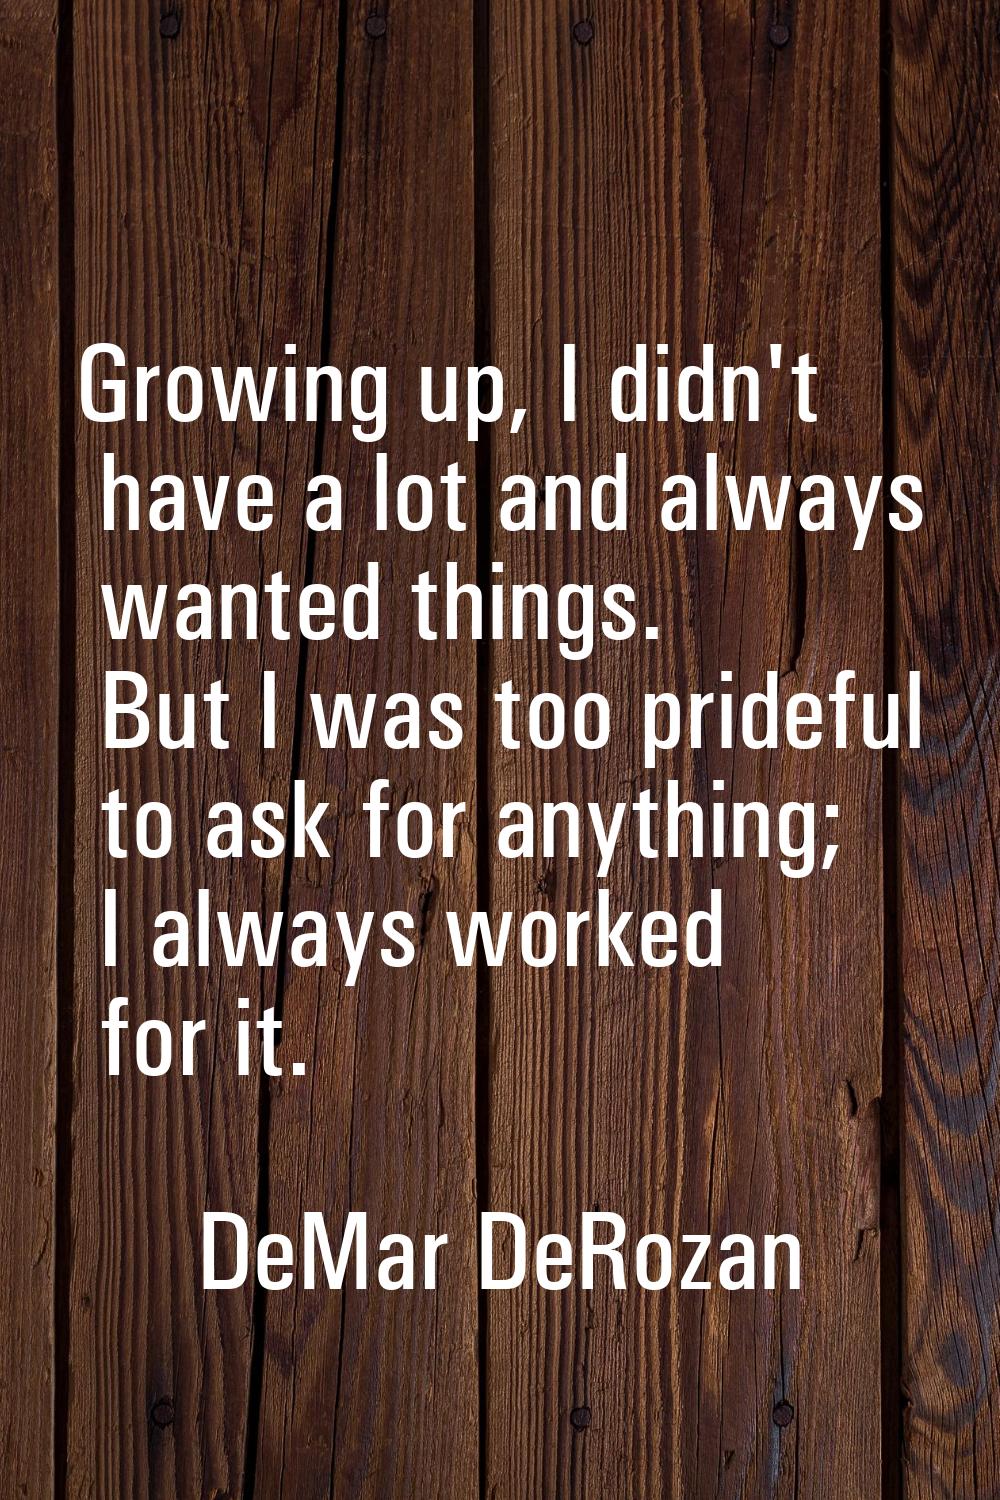 Growing up, I didn't have a lot and always wanted things. But I was too prideful to ask for anythin